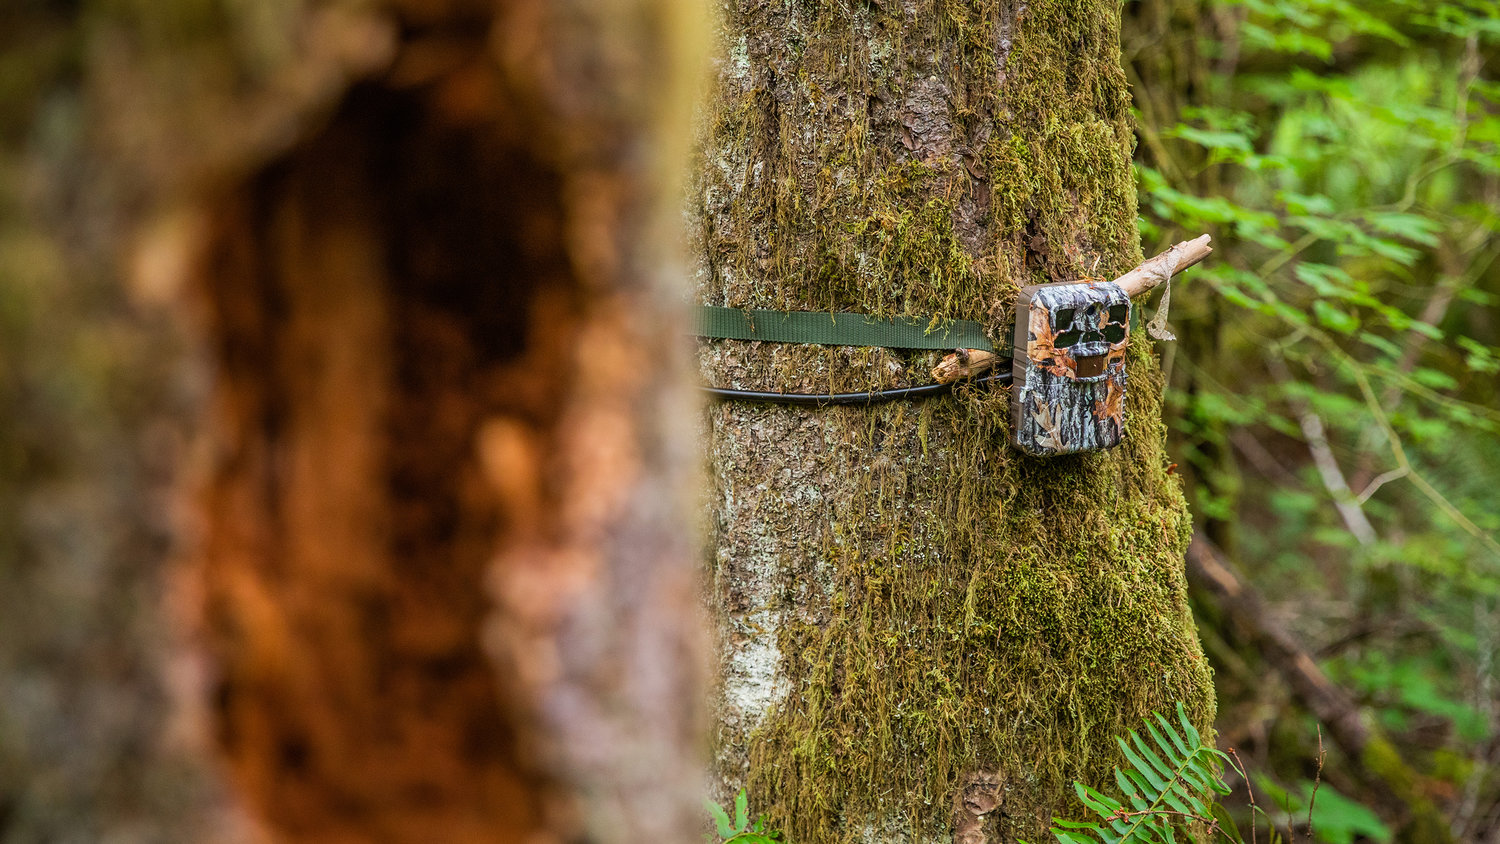 A motion activated game camera records still photographs in a remote area of the Gifford Pinchot National Forest in Lewis County Saturday morning.